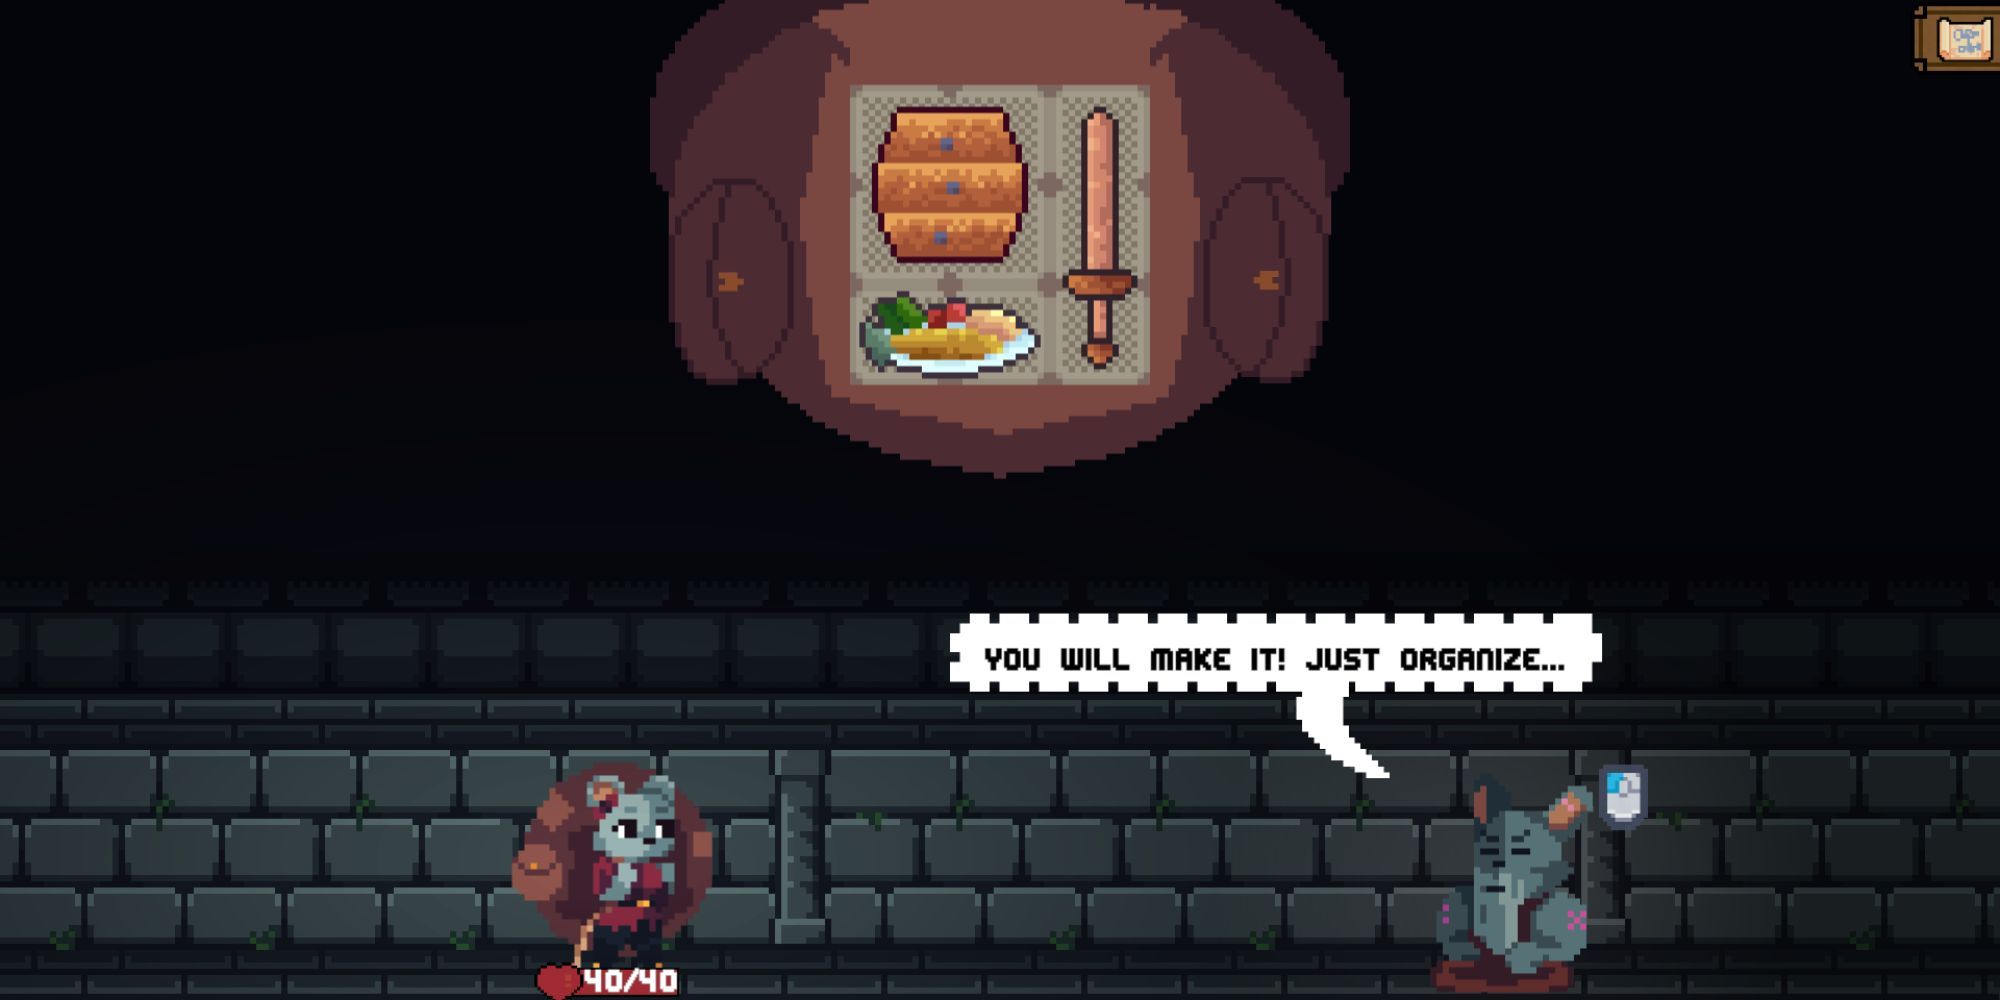 A wise mouse gives advice to the Backpack Hero in a dark cellar